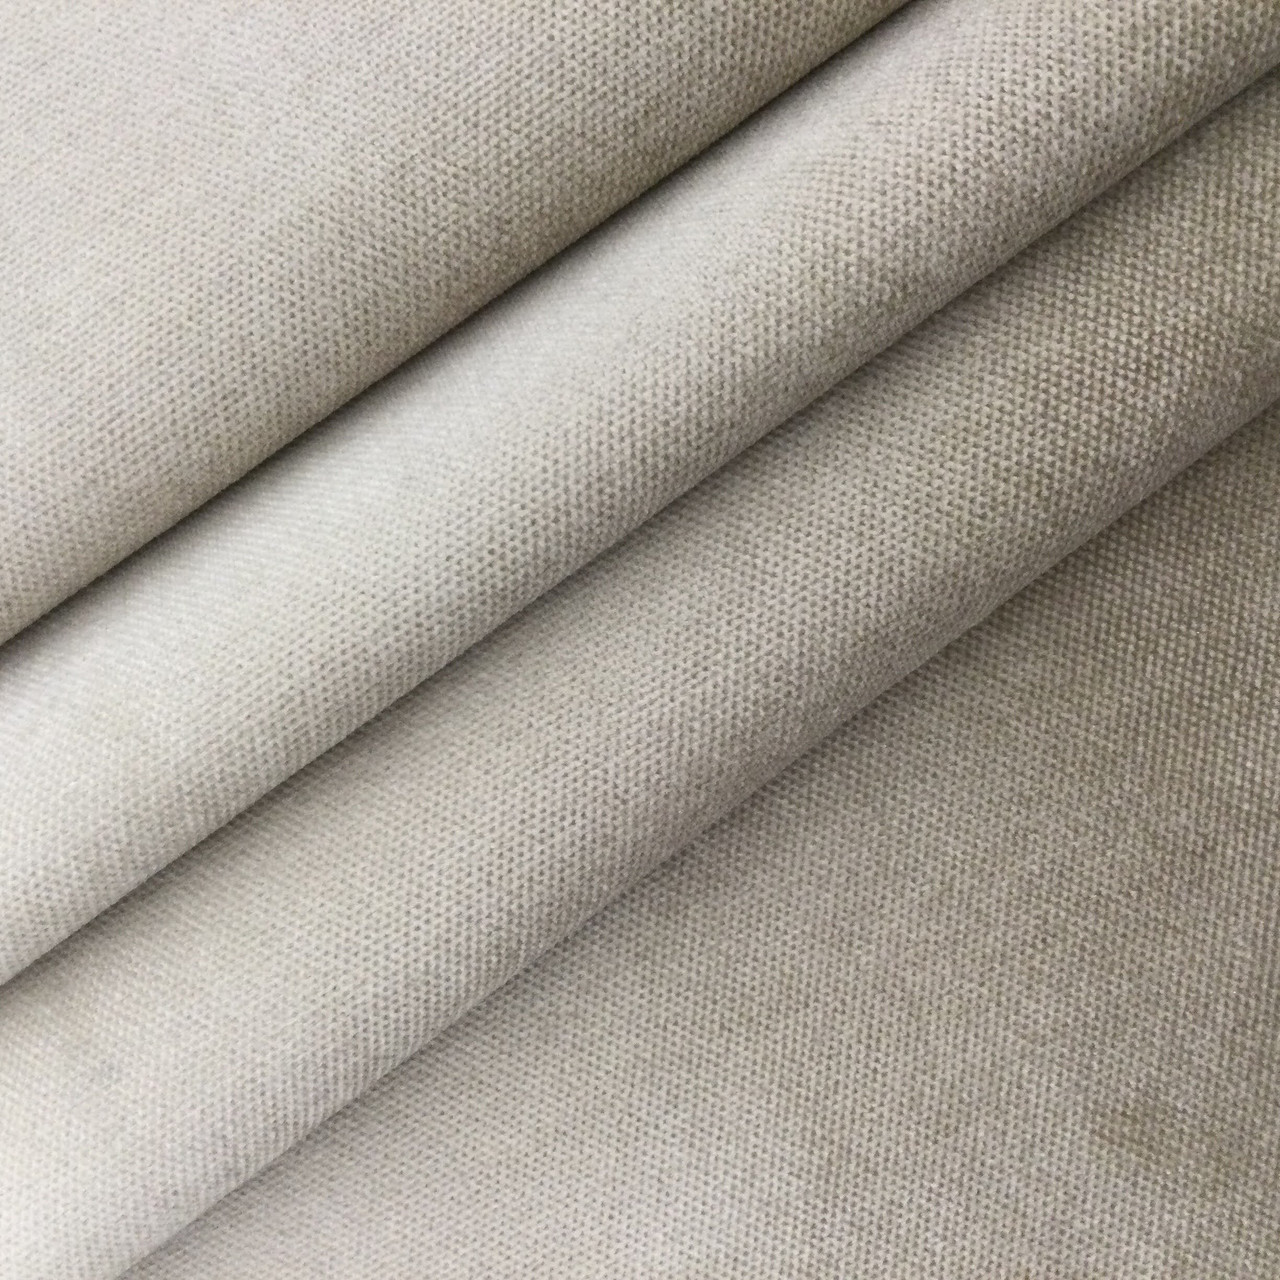 Fabric by The Yard - 100% Polyester Upholstery Sewing Fabrics